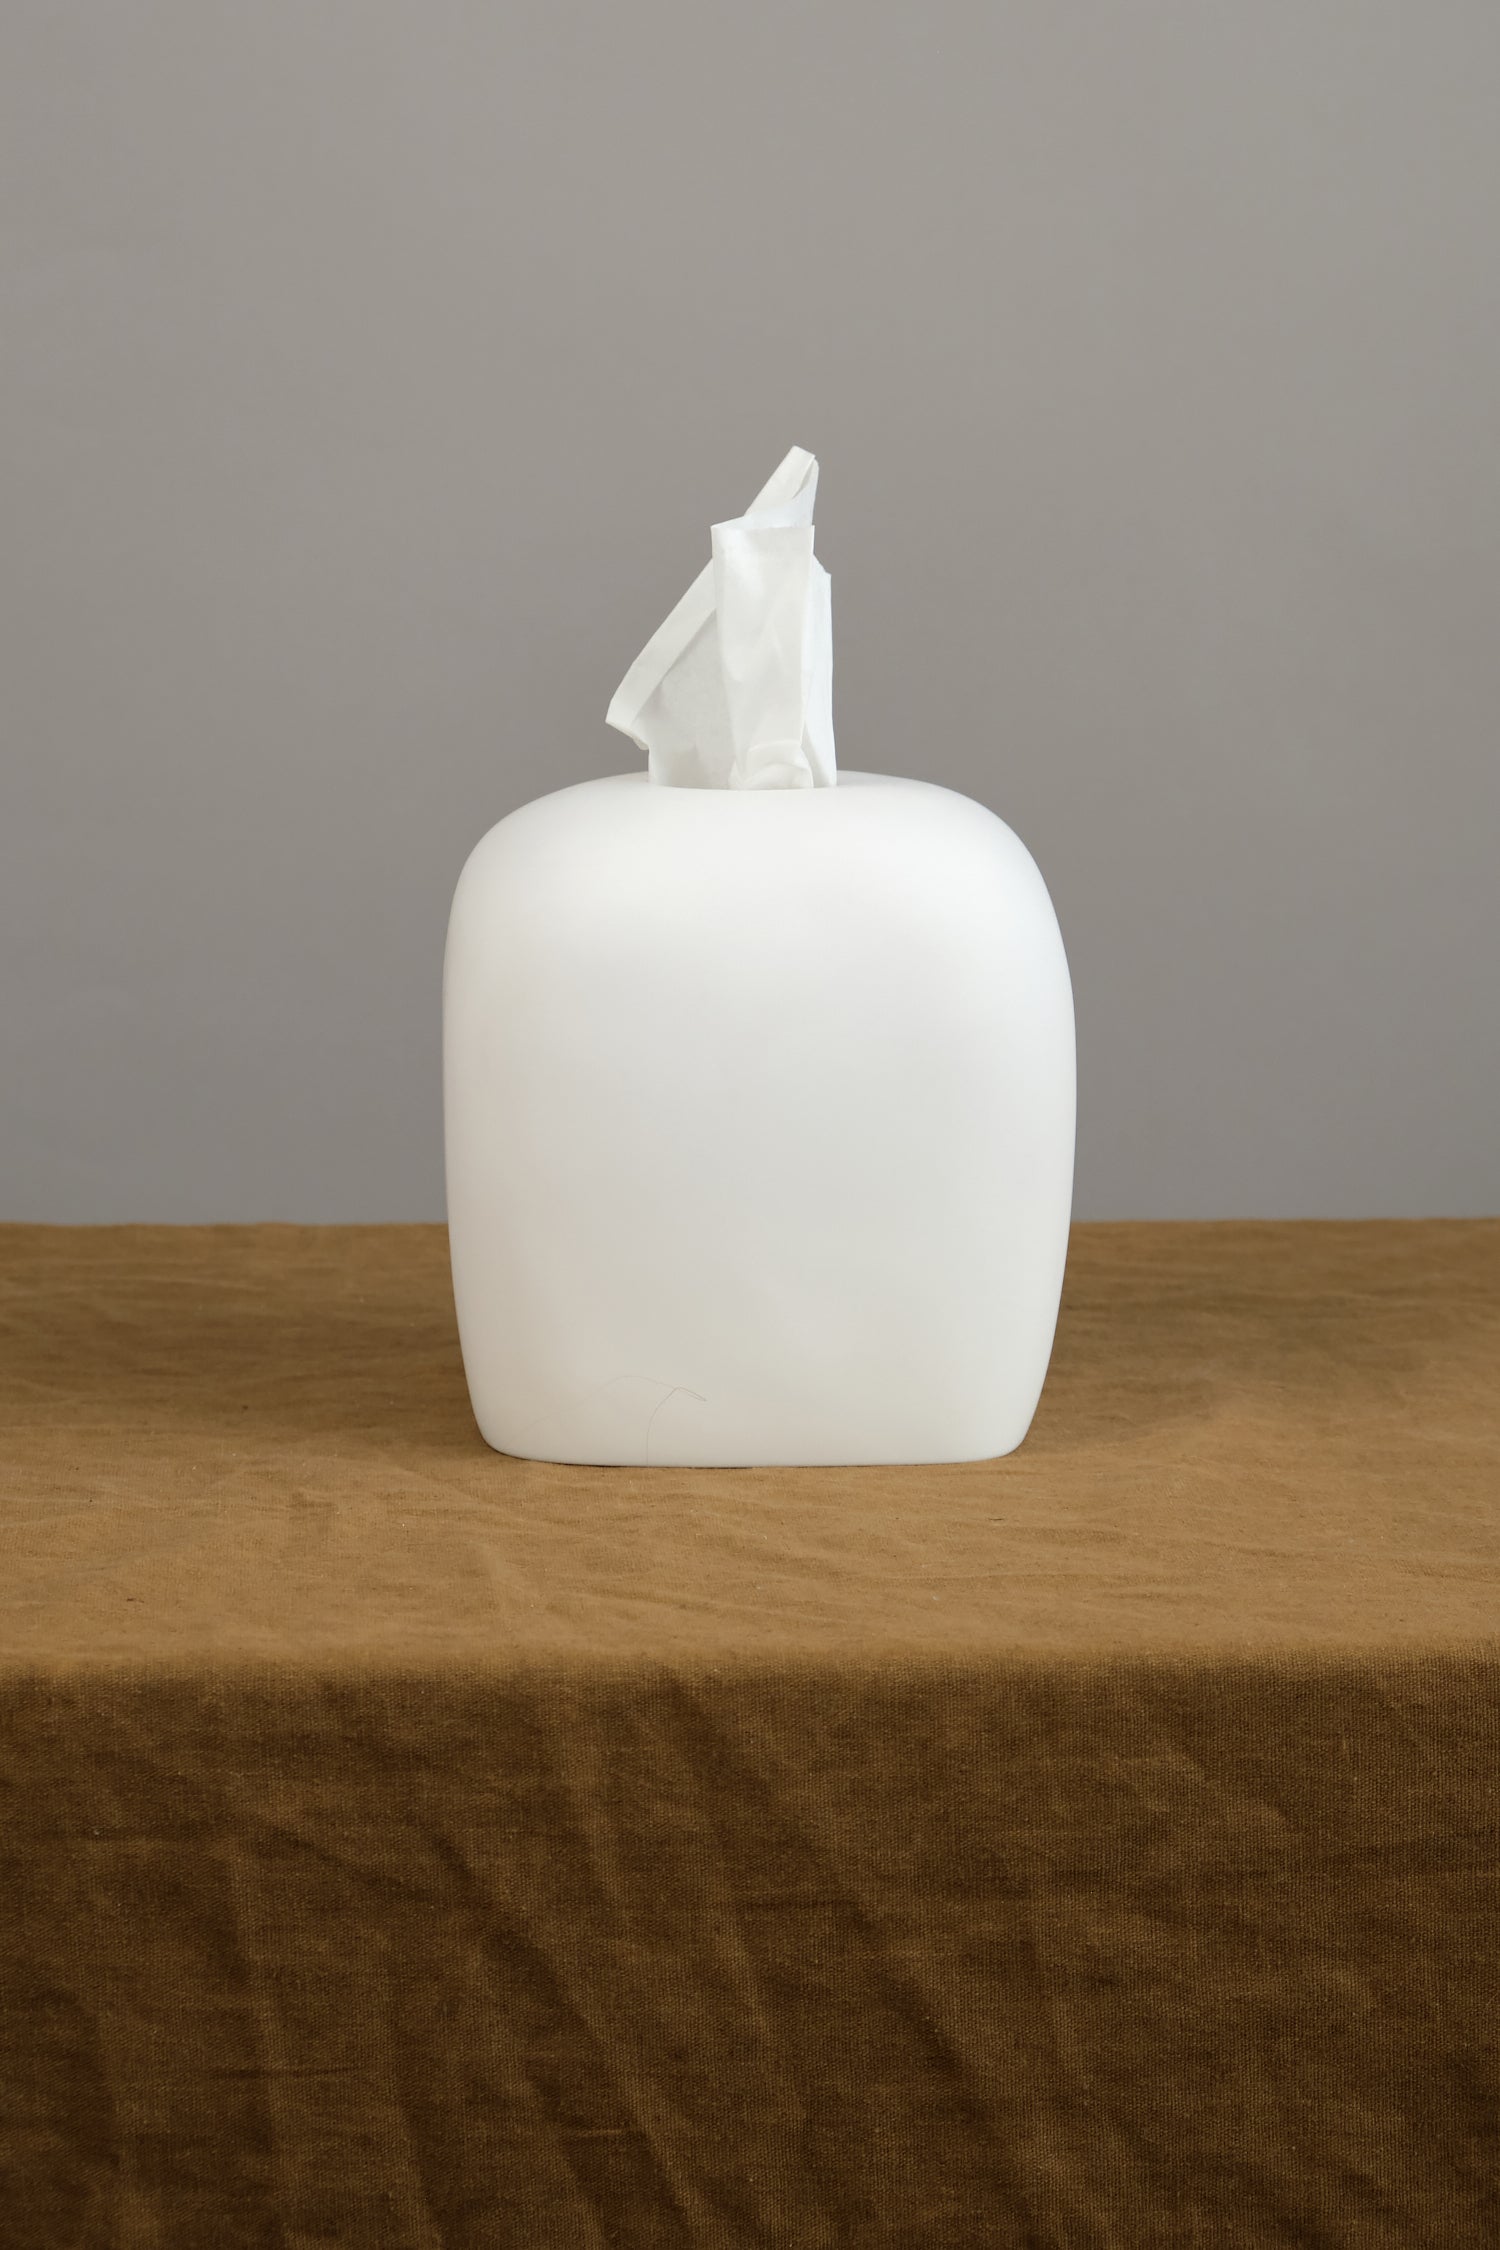 Arc Tissue Box with tissues